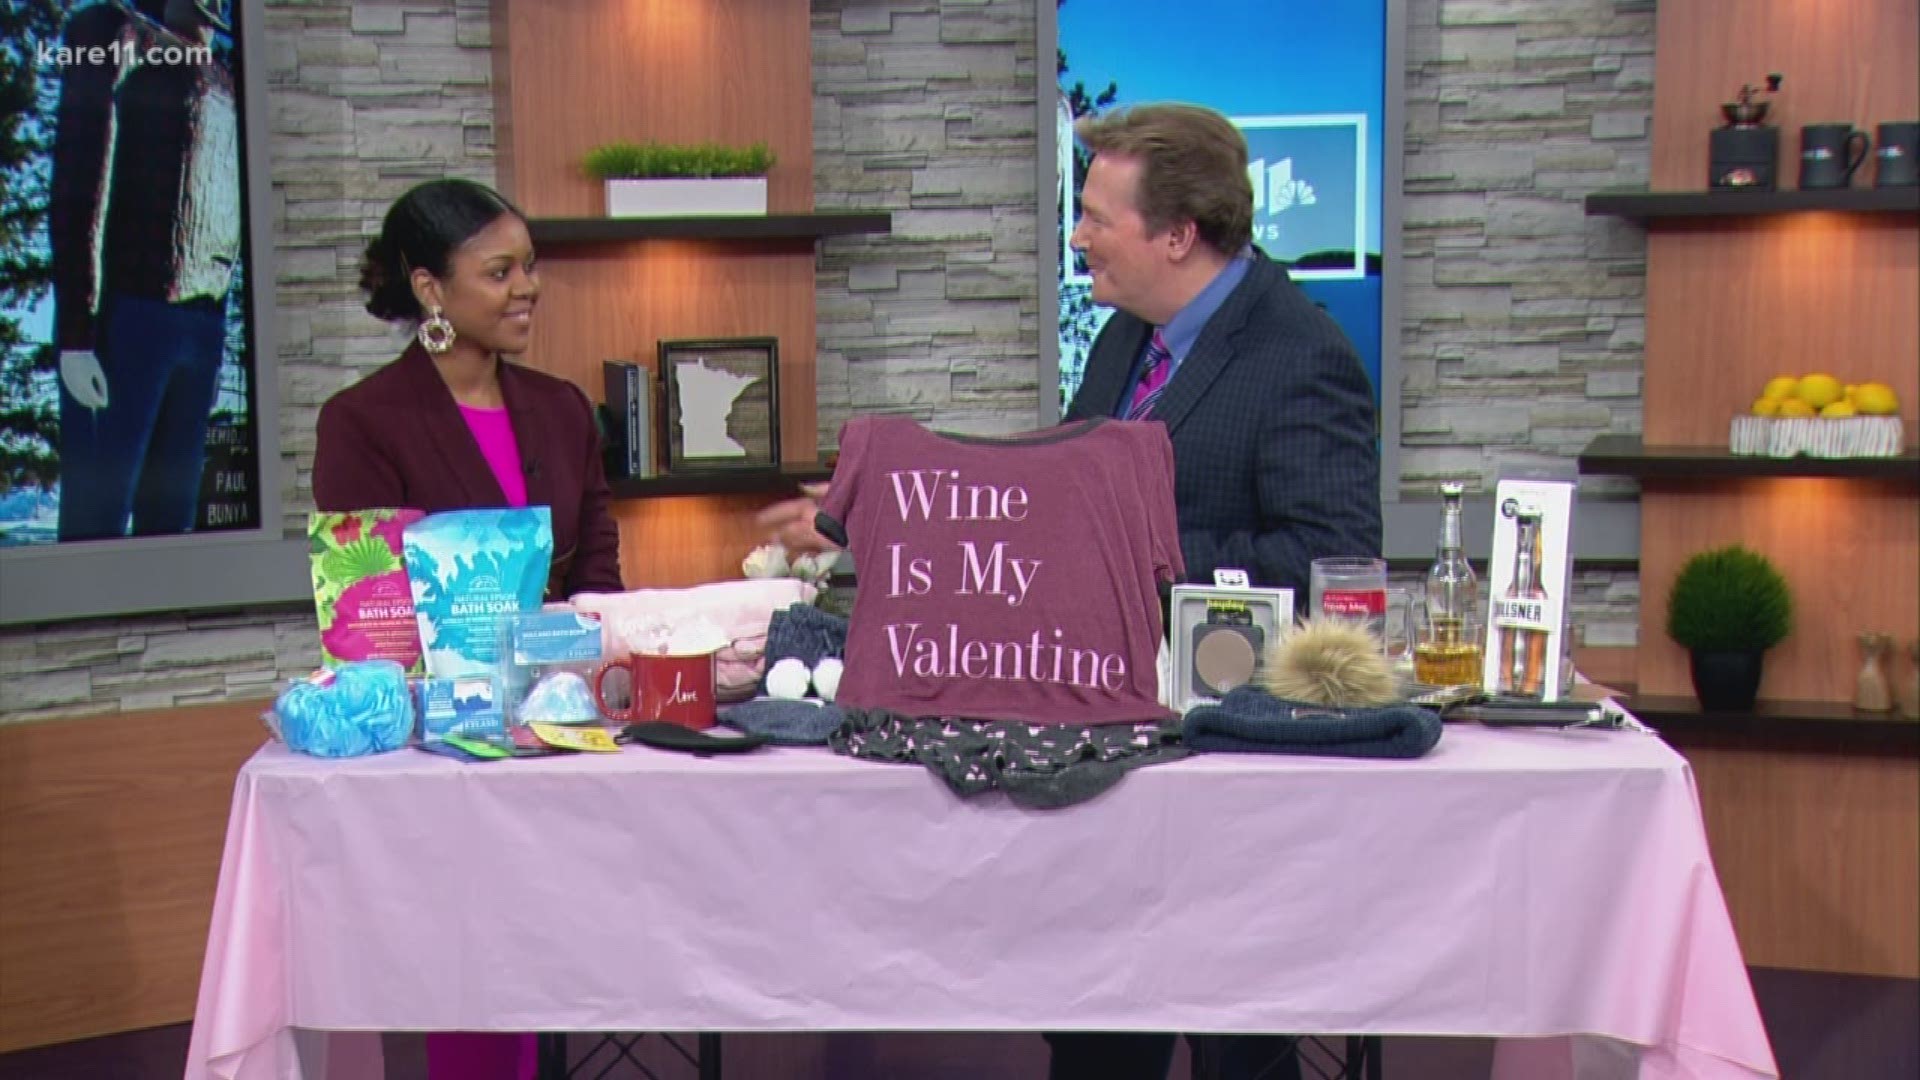 Valentine's day is next week and no matter your budget you can find great gifts for that special someone in your life.